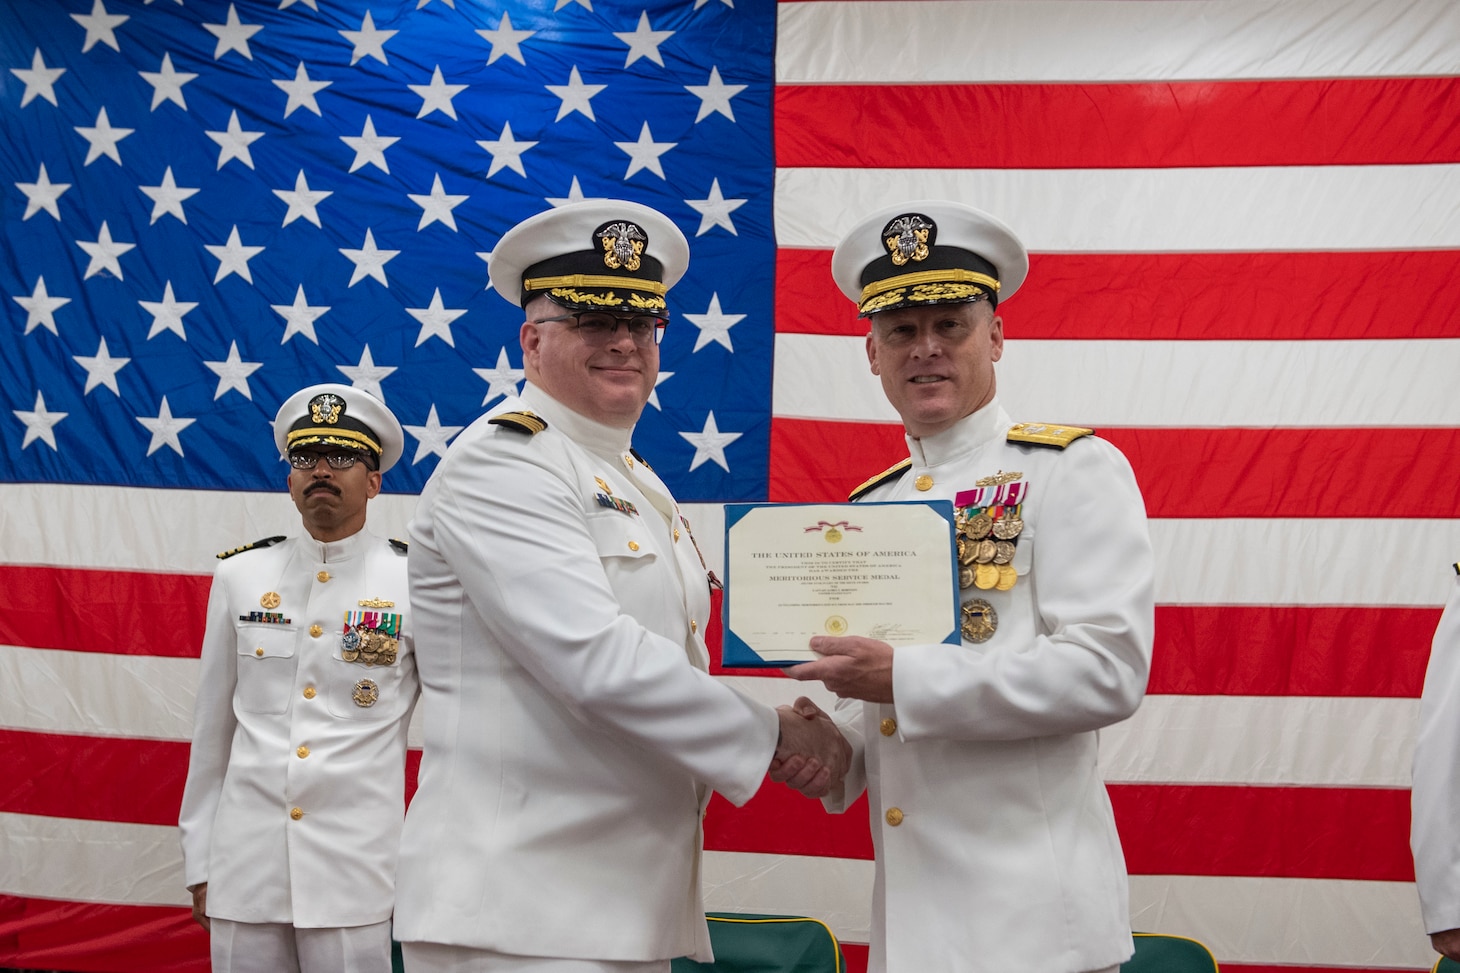 Capt. James T. Robinson, commanding officer of the forward-deployed amphibious transport dock ship USS Green Bay (LPD 20), receives the Meritorious Service Medal during a change-of-command ceremony in the ship’s vehicle stowage area. Green Bay, part of Amphibious Squadron 11, is operating in the U.S. 7th Fleet area of responsibility to enhance interoperability with allies and partners, and serve as a ready response force to defend peace and stability in the Indo-Pacific region. (U.S. Navy photo by Mass Communication Specialist Seaman Matthew Bakerian)